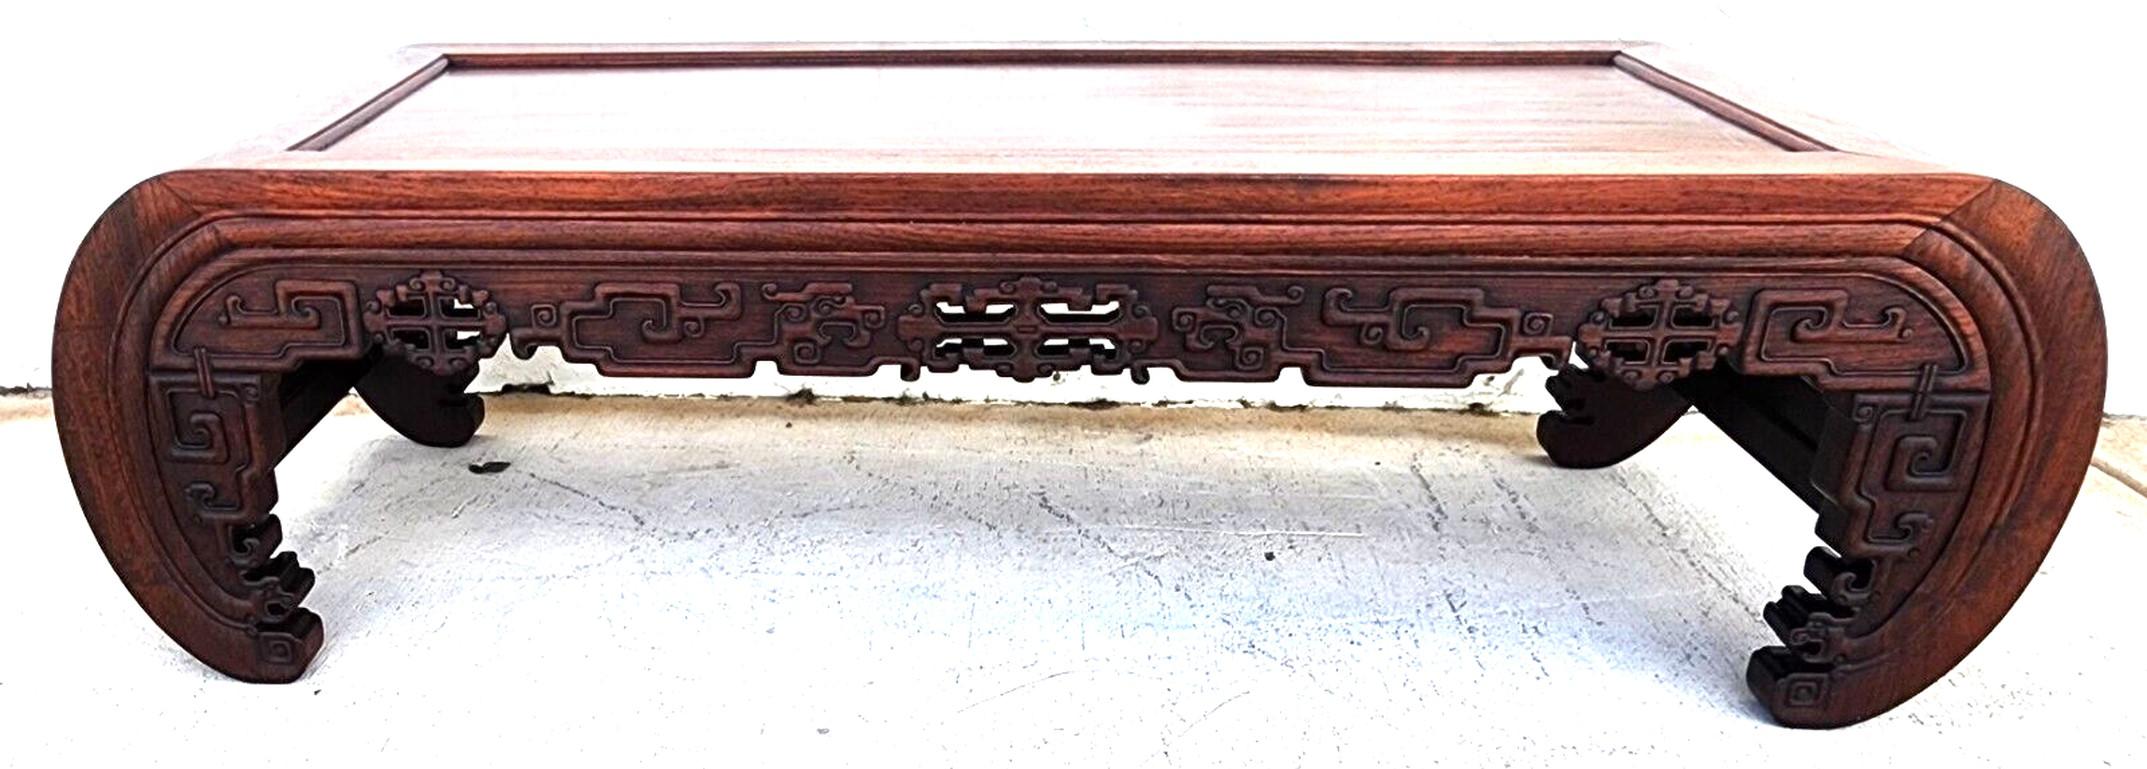 Antique Opium Coffee Table Rosewood Asian Chinoiserie For Sale 5